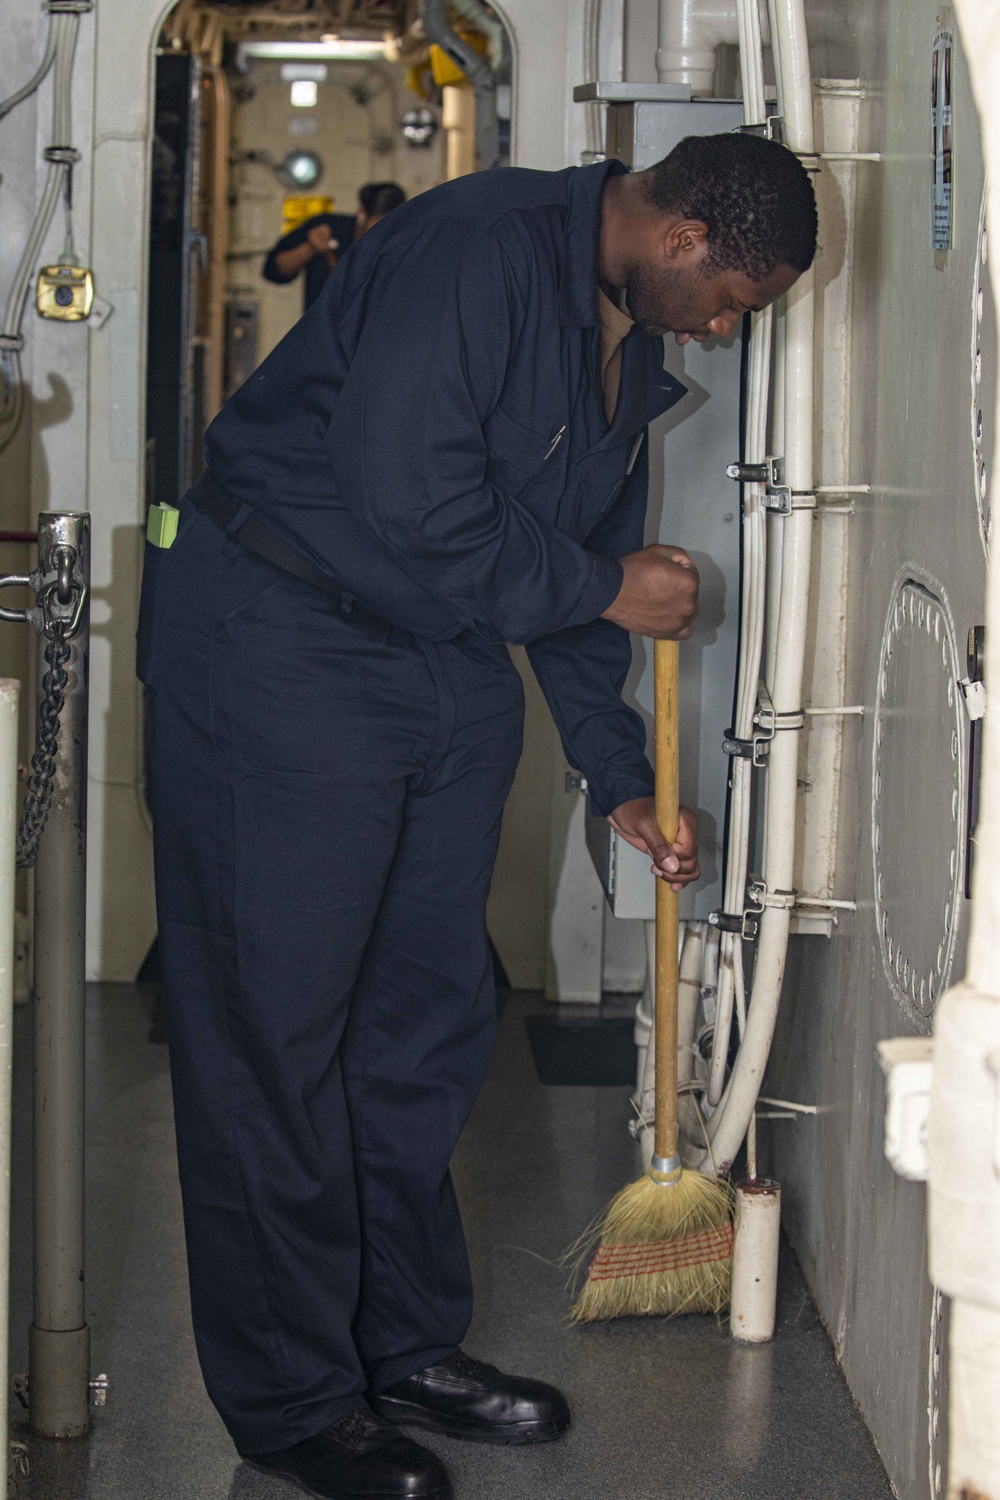 Sailors take part in cleaning station